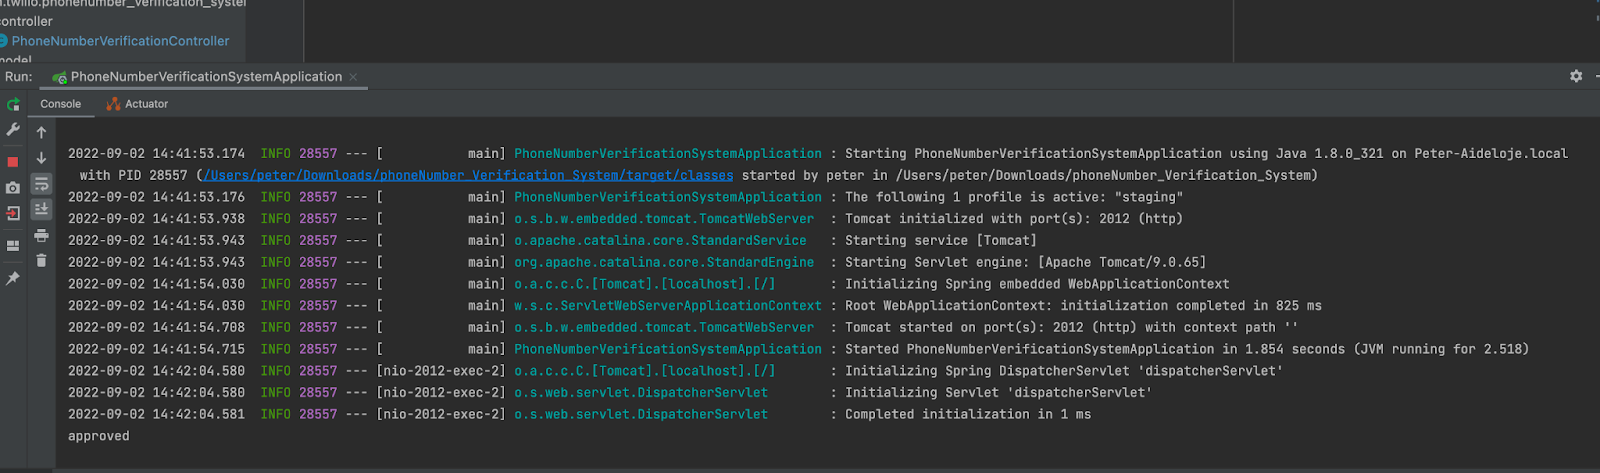 image showing approval response on IntelliJ IDE terminal after testing Twilio verify api on postman